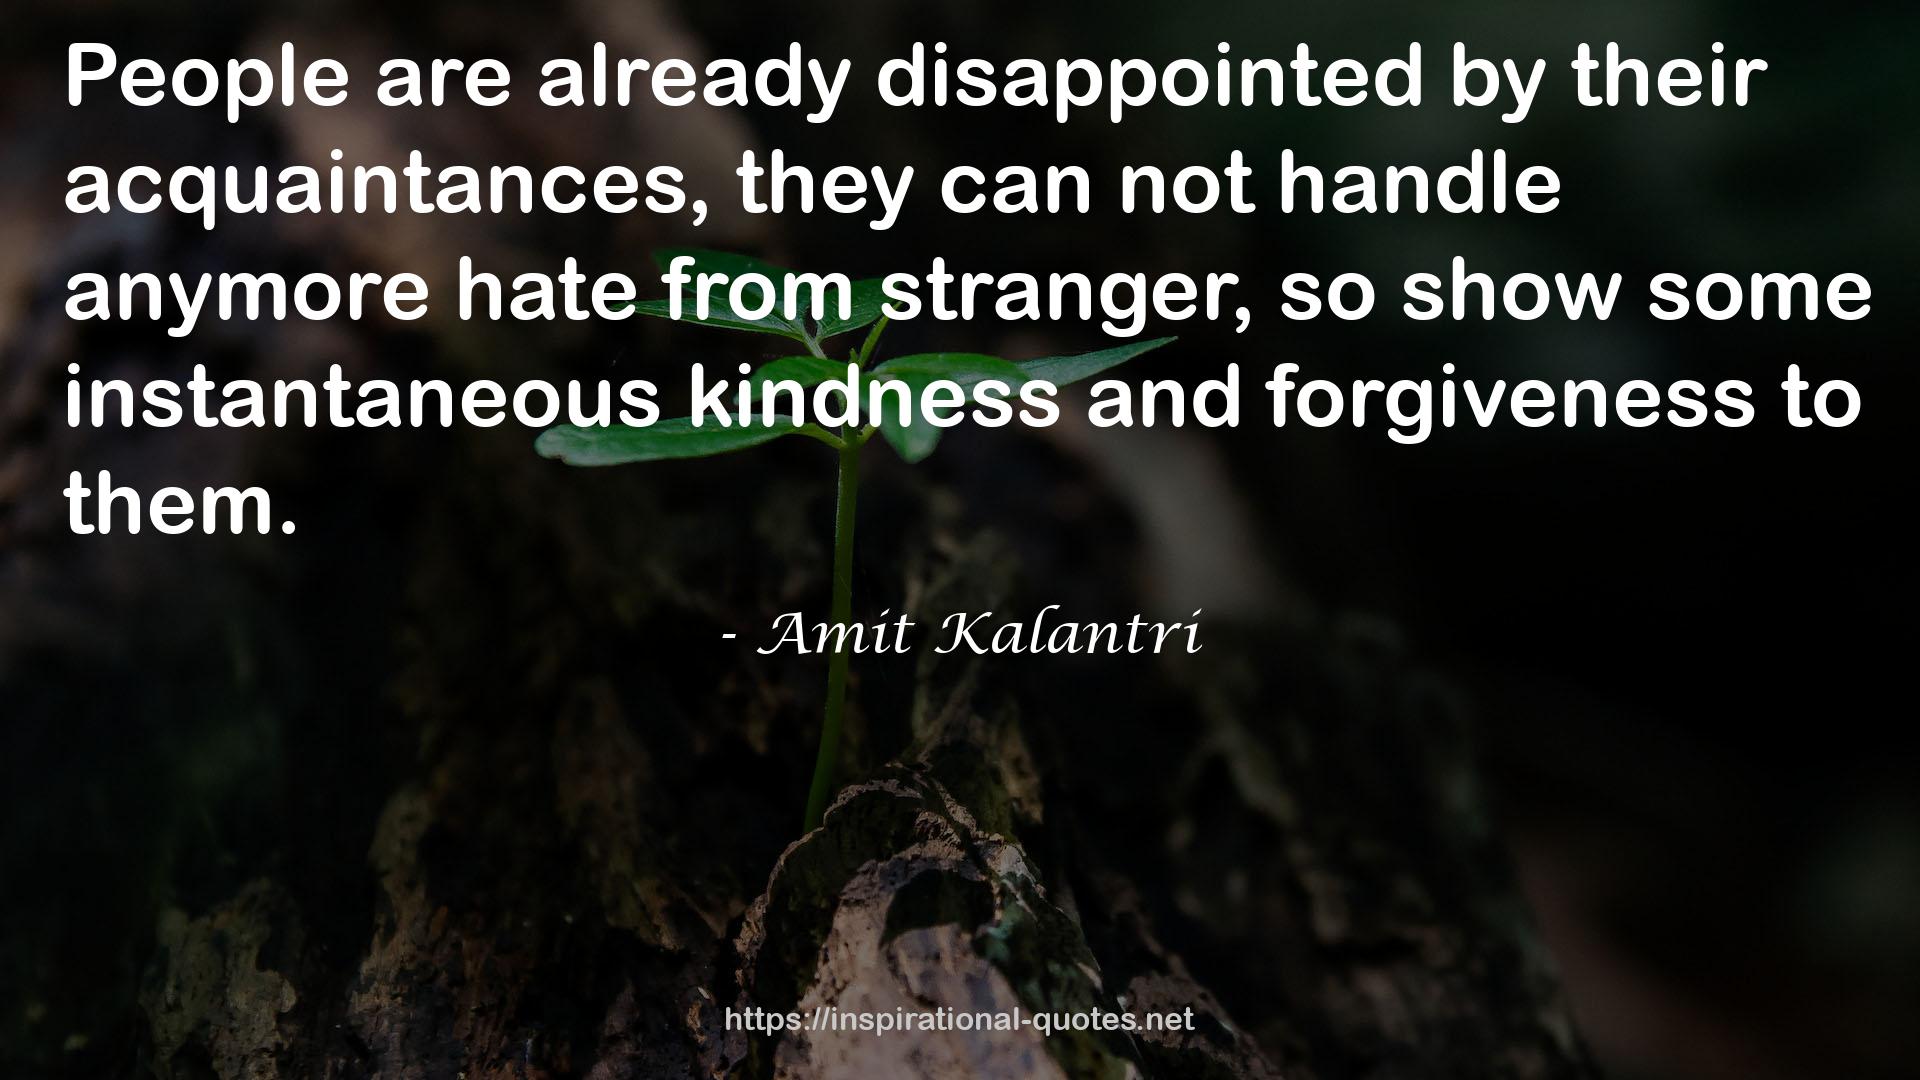 some instantaneous kindness  QUOTES